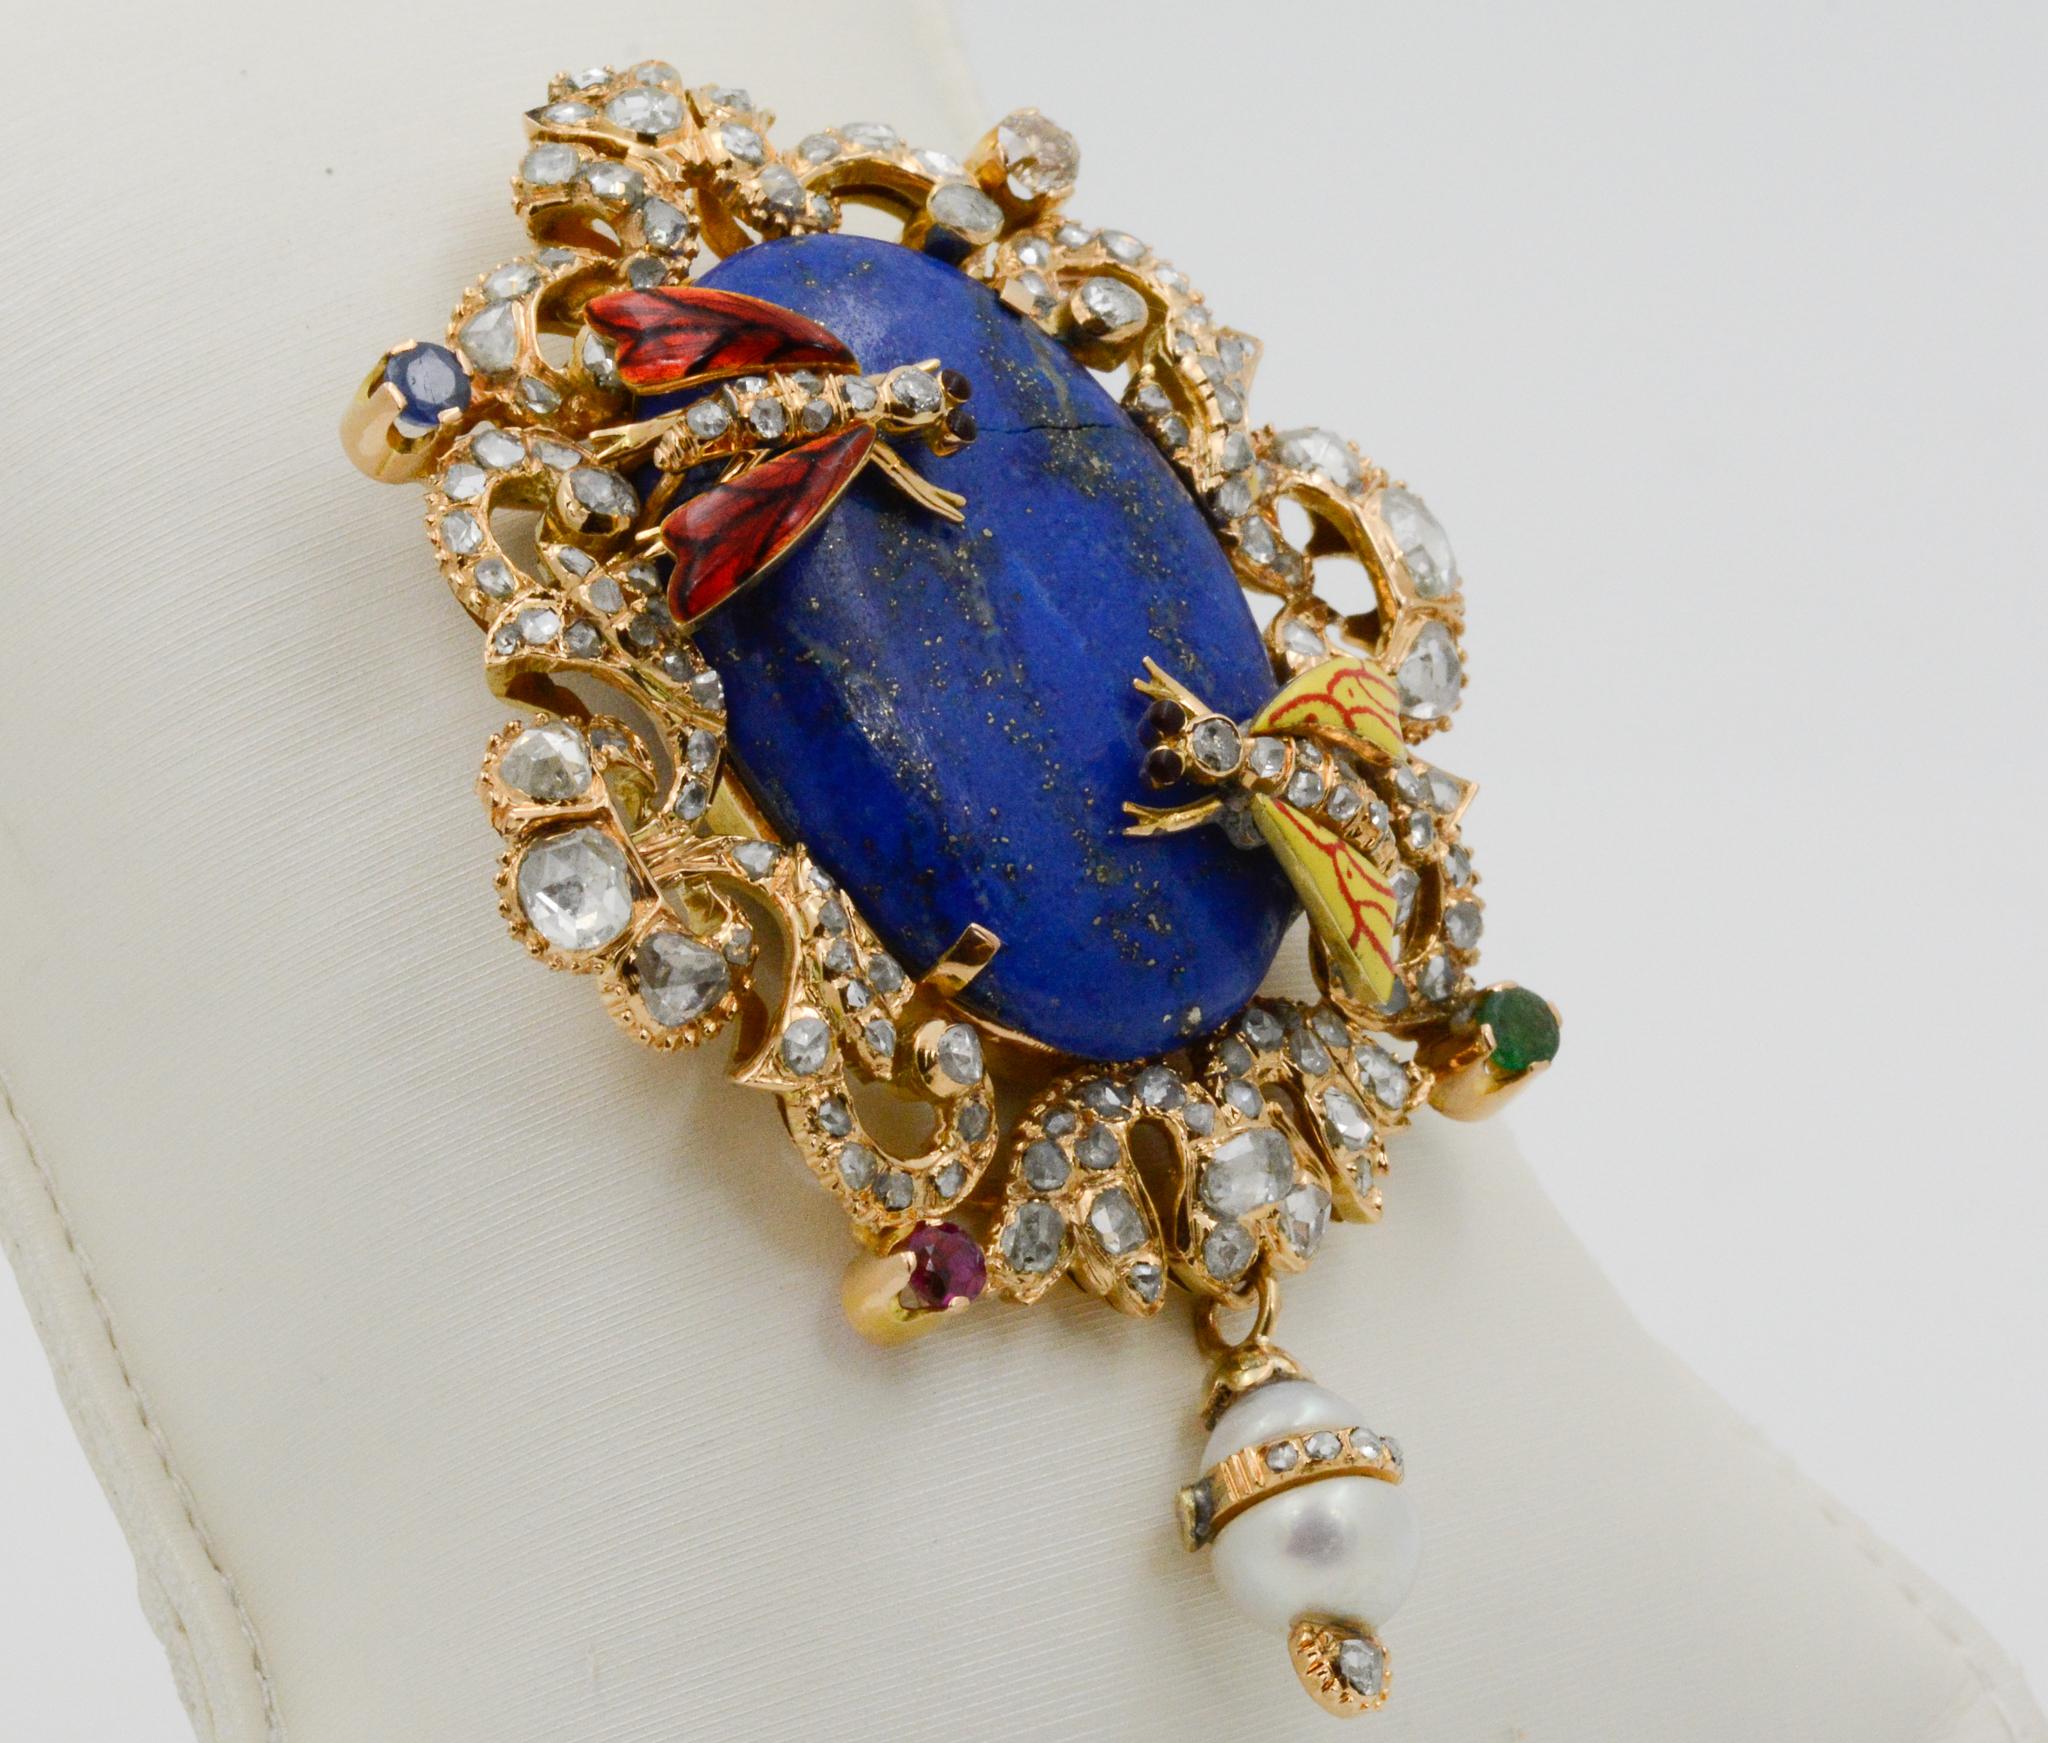 Early Victorian Victorian Middle Eastern 14 Karat Yellow Gold Lapis, Diamond and Pearl Pin